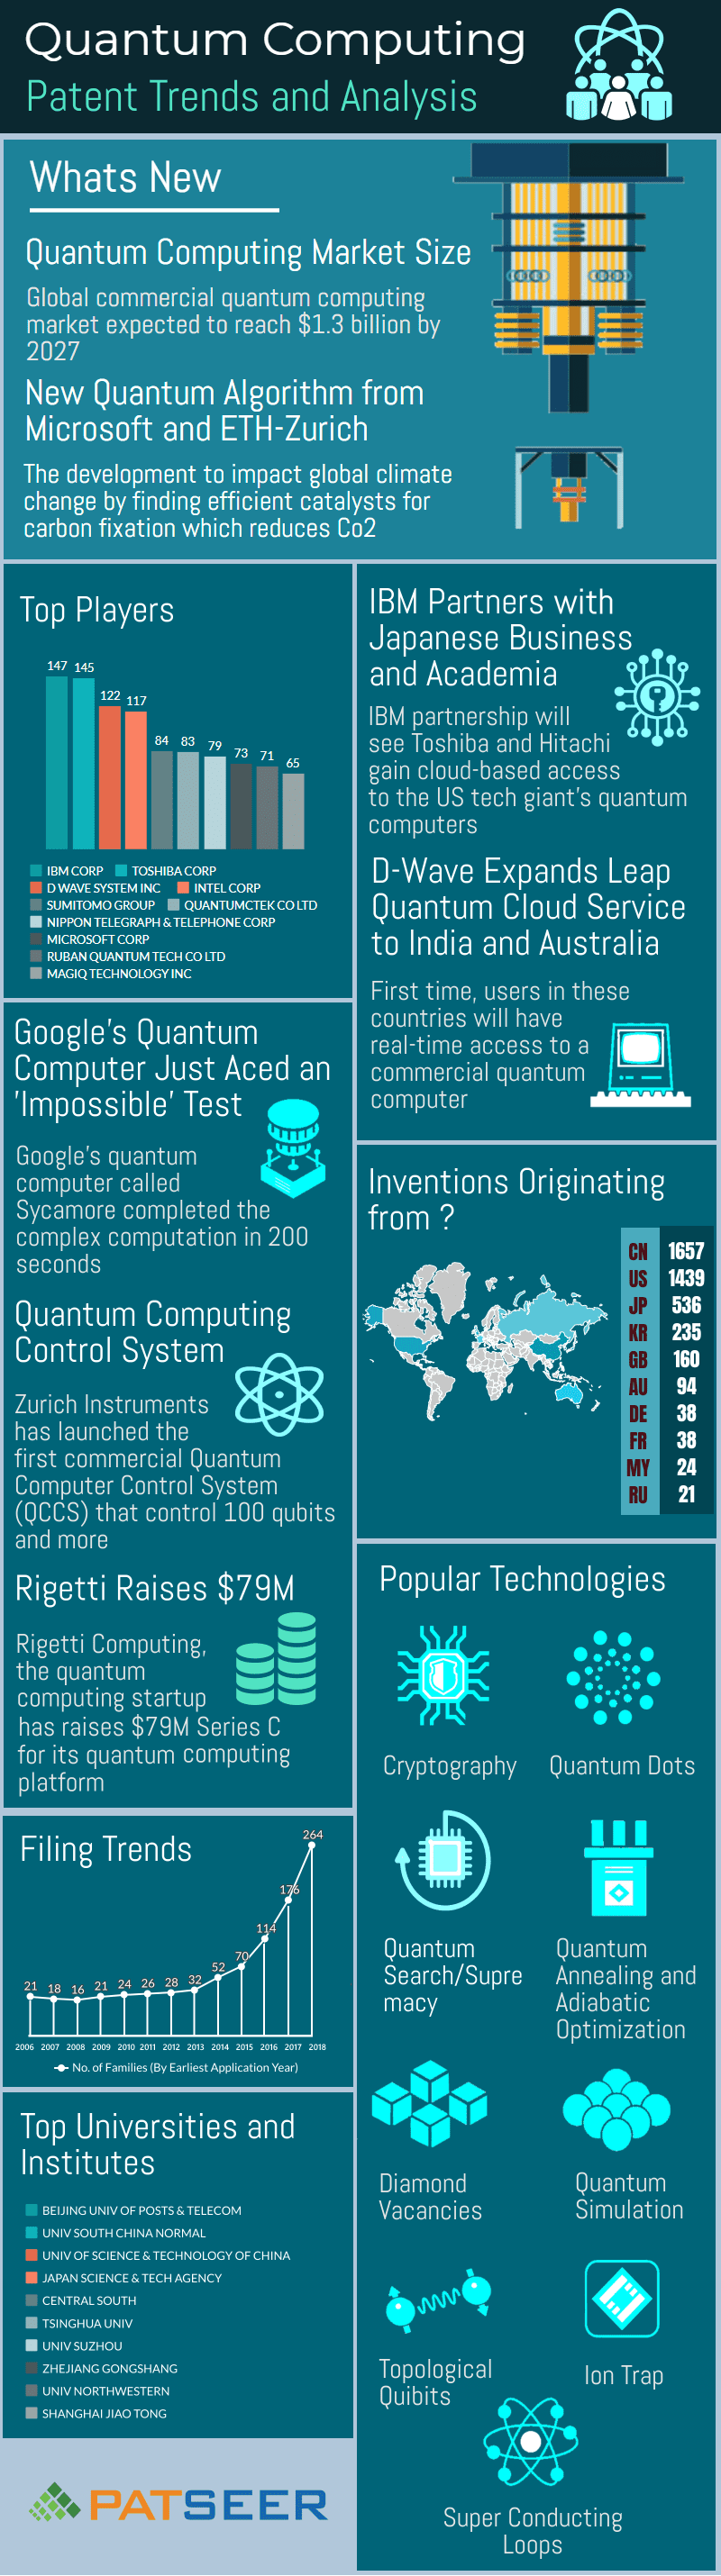 Infographics on Quantum Computing Patent Trends and Analysis